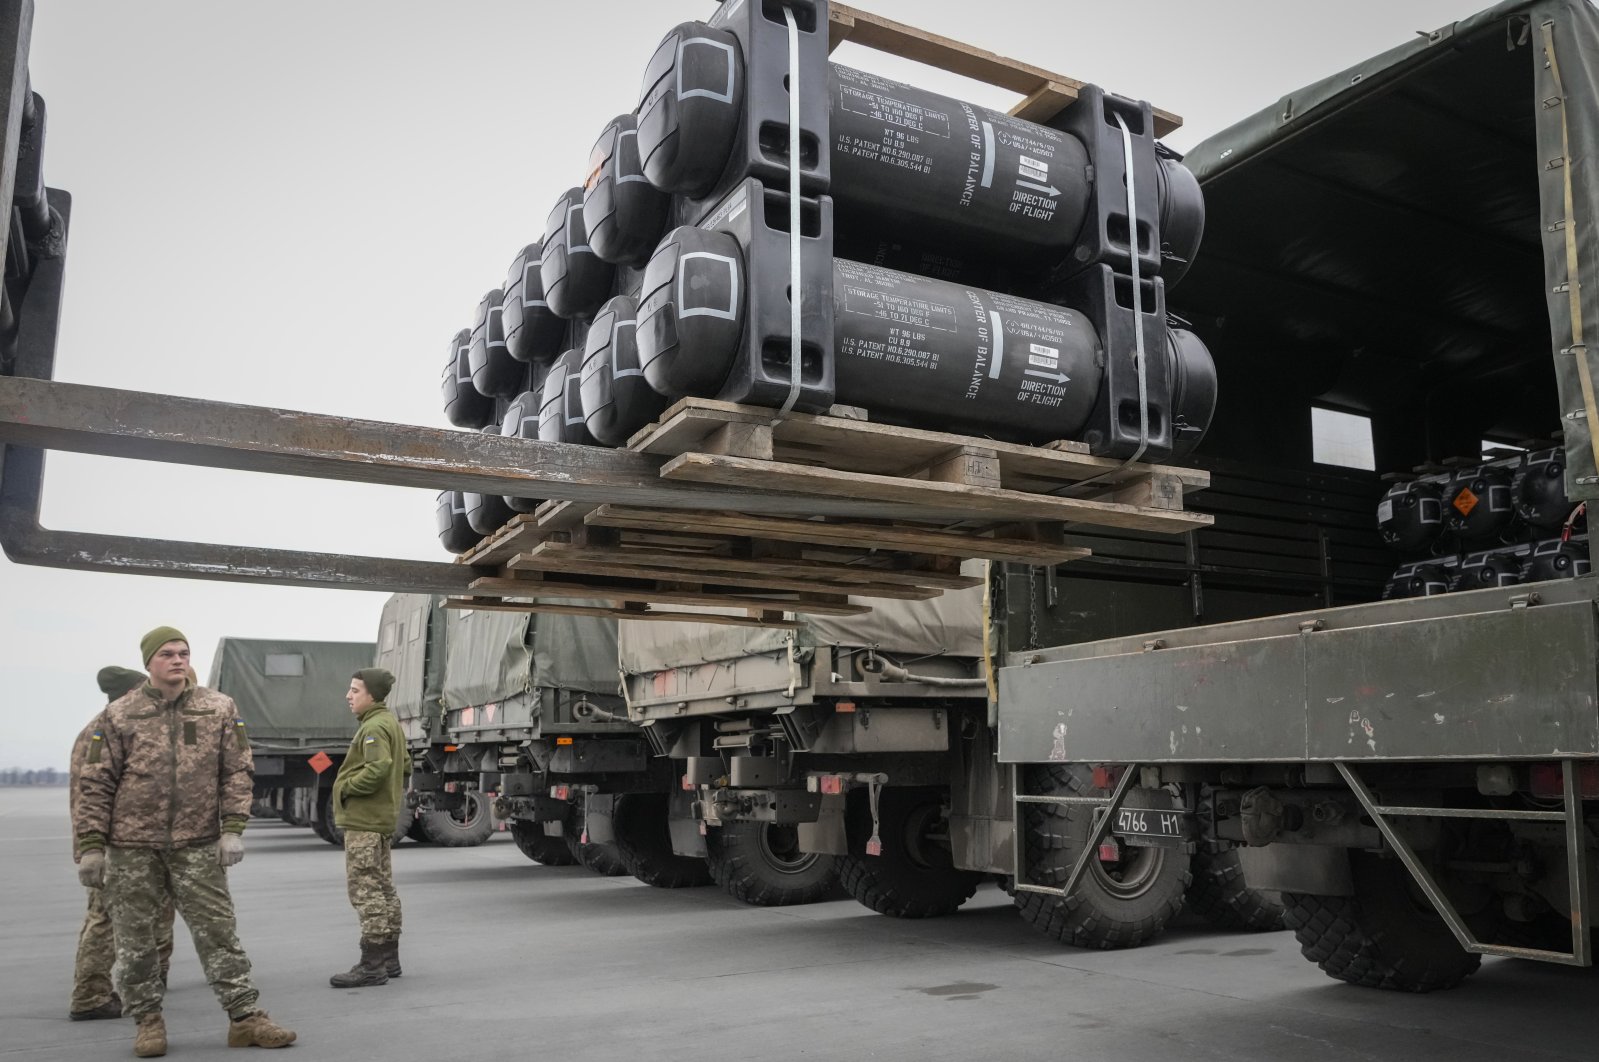 Ukrainian soldieres load Javelin anti-tank missiles, delivered as part of the United States security assistance to Ukraine, into military trucks at the Boryspil Airport, outside Kyiv, Ukraine, Feb. 11, 2022. (AP Photo)